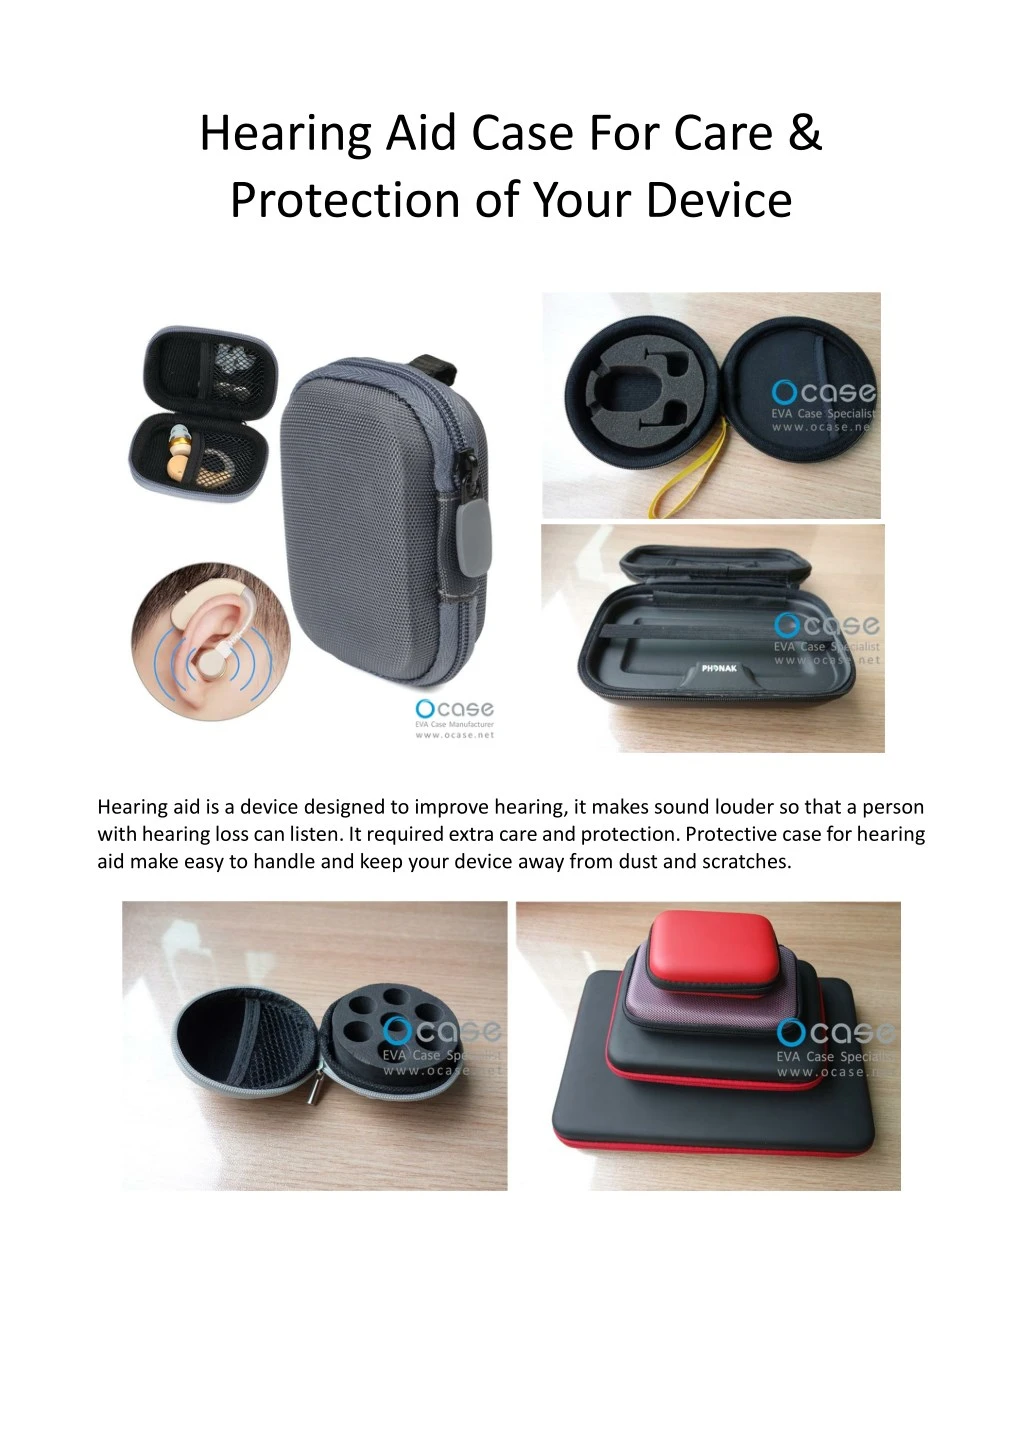 hearing aid case for care protection of your